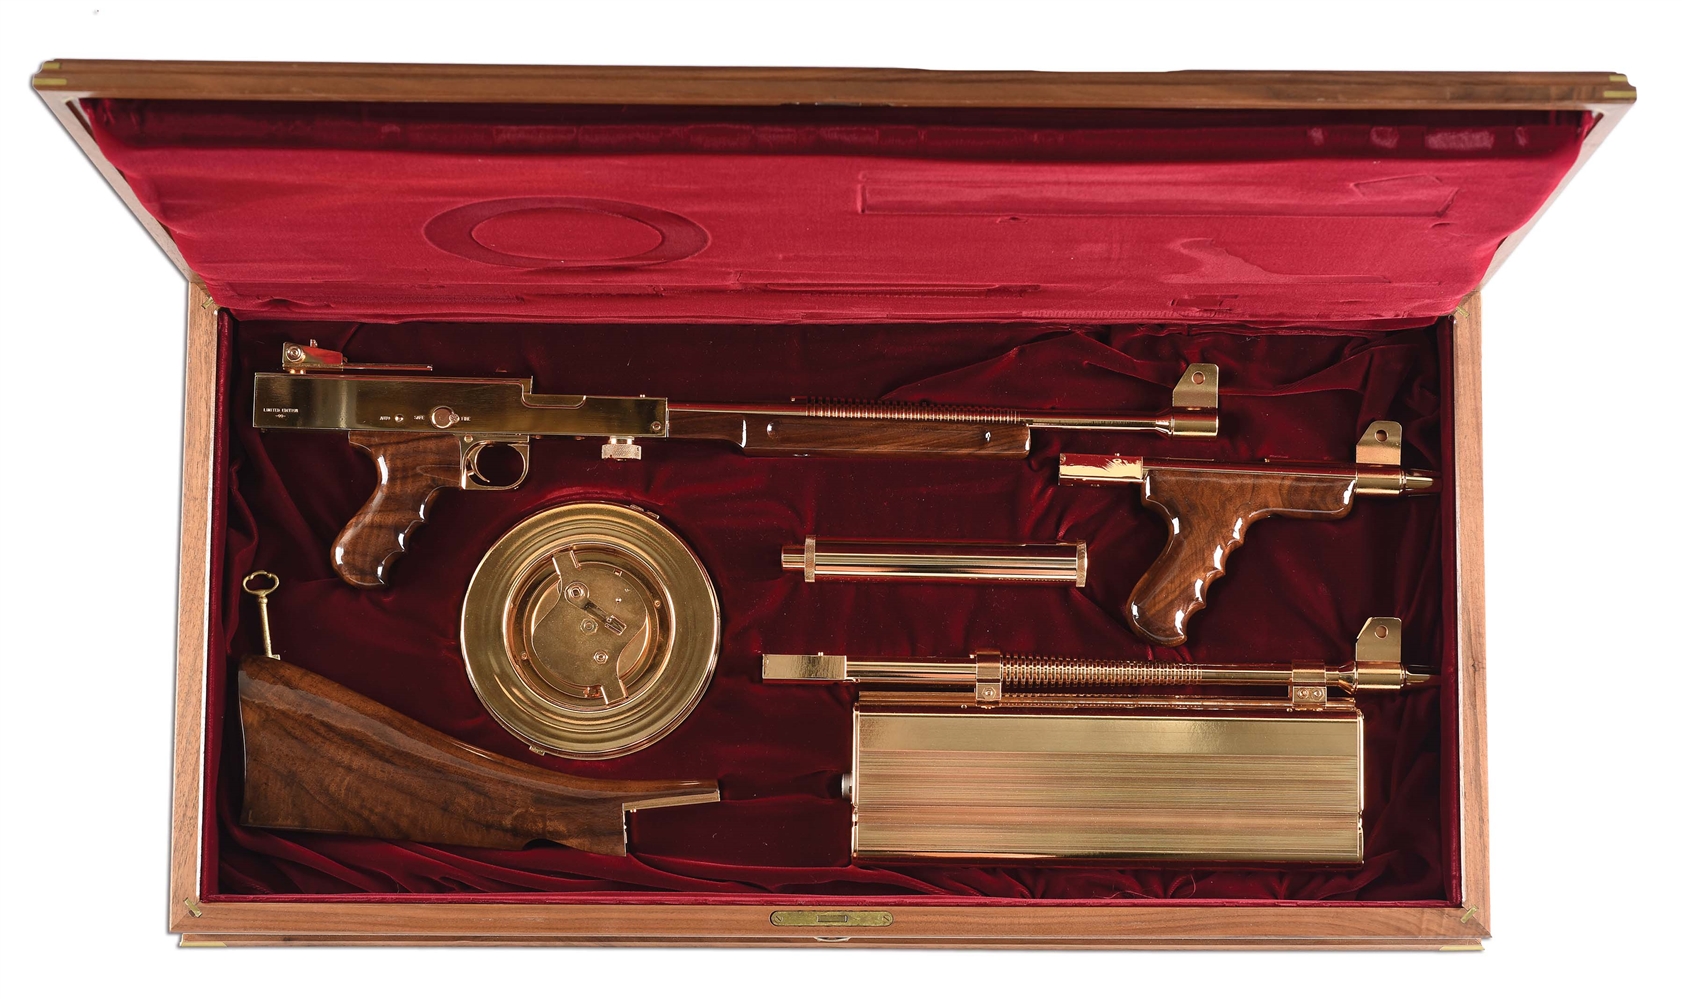 (N) ABSOLUTELY MAGNIFICENT UNFIRED GOLD M-2 LIMITED EDITION AMERICAN ARMS – AMERICAN 180 MACHINE GUN WITH LASER-LOK SIGHT, SILENCER, AND ORIGINAL FACTORY WOODEN DISPLAY CASE (FULLY TRANSFERABLE) 